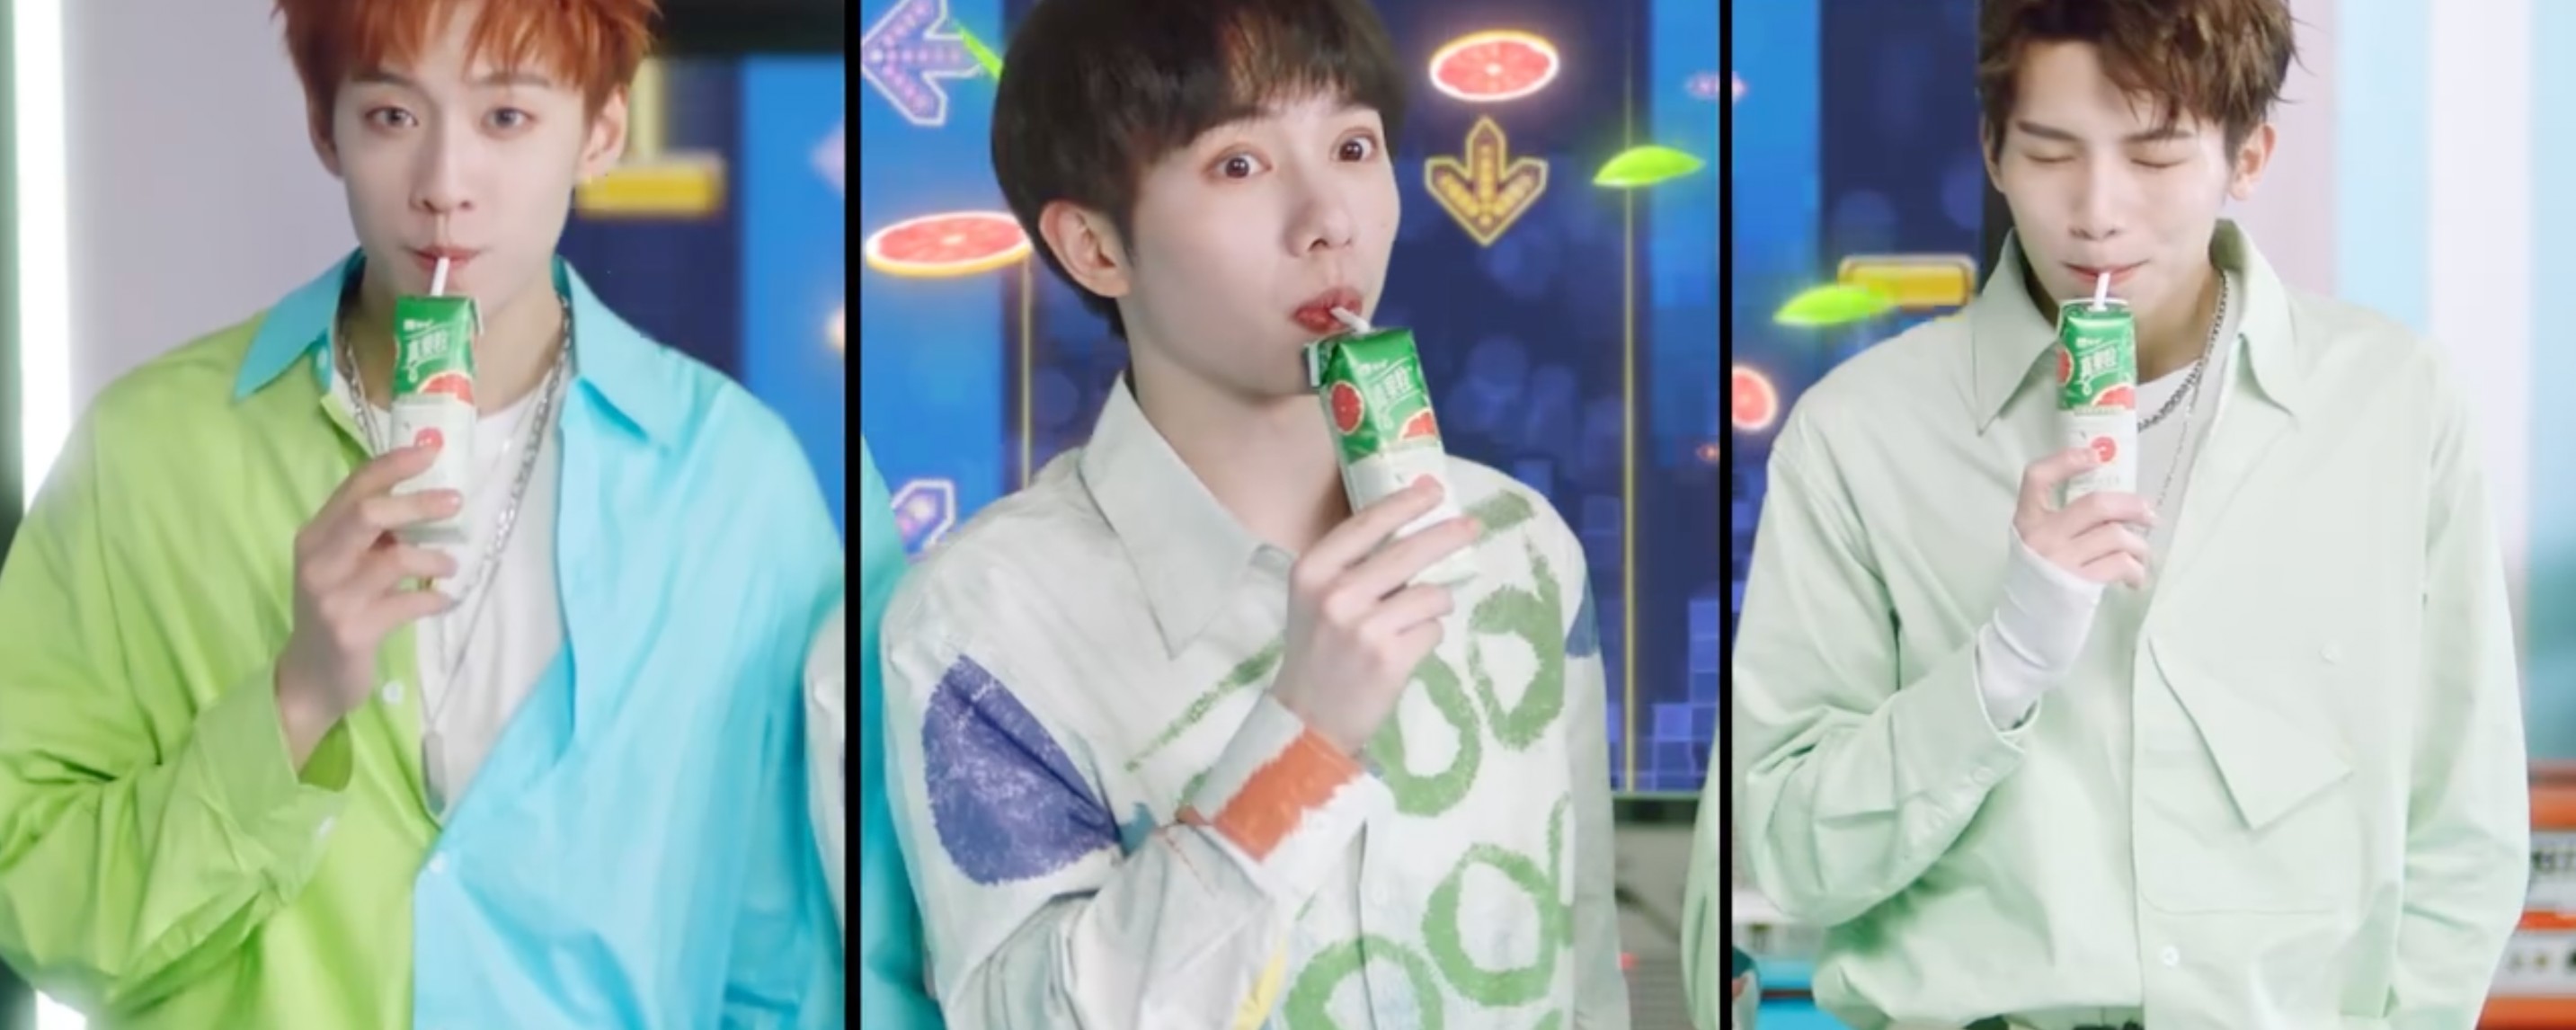 Why Chinese-Pop Fans Are Spending Millions on Milk (It's Not for Drinking)